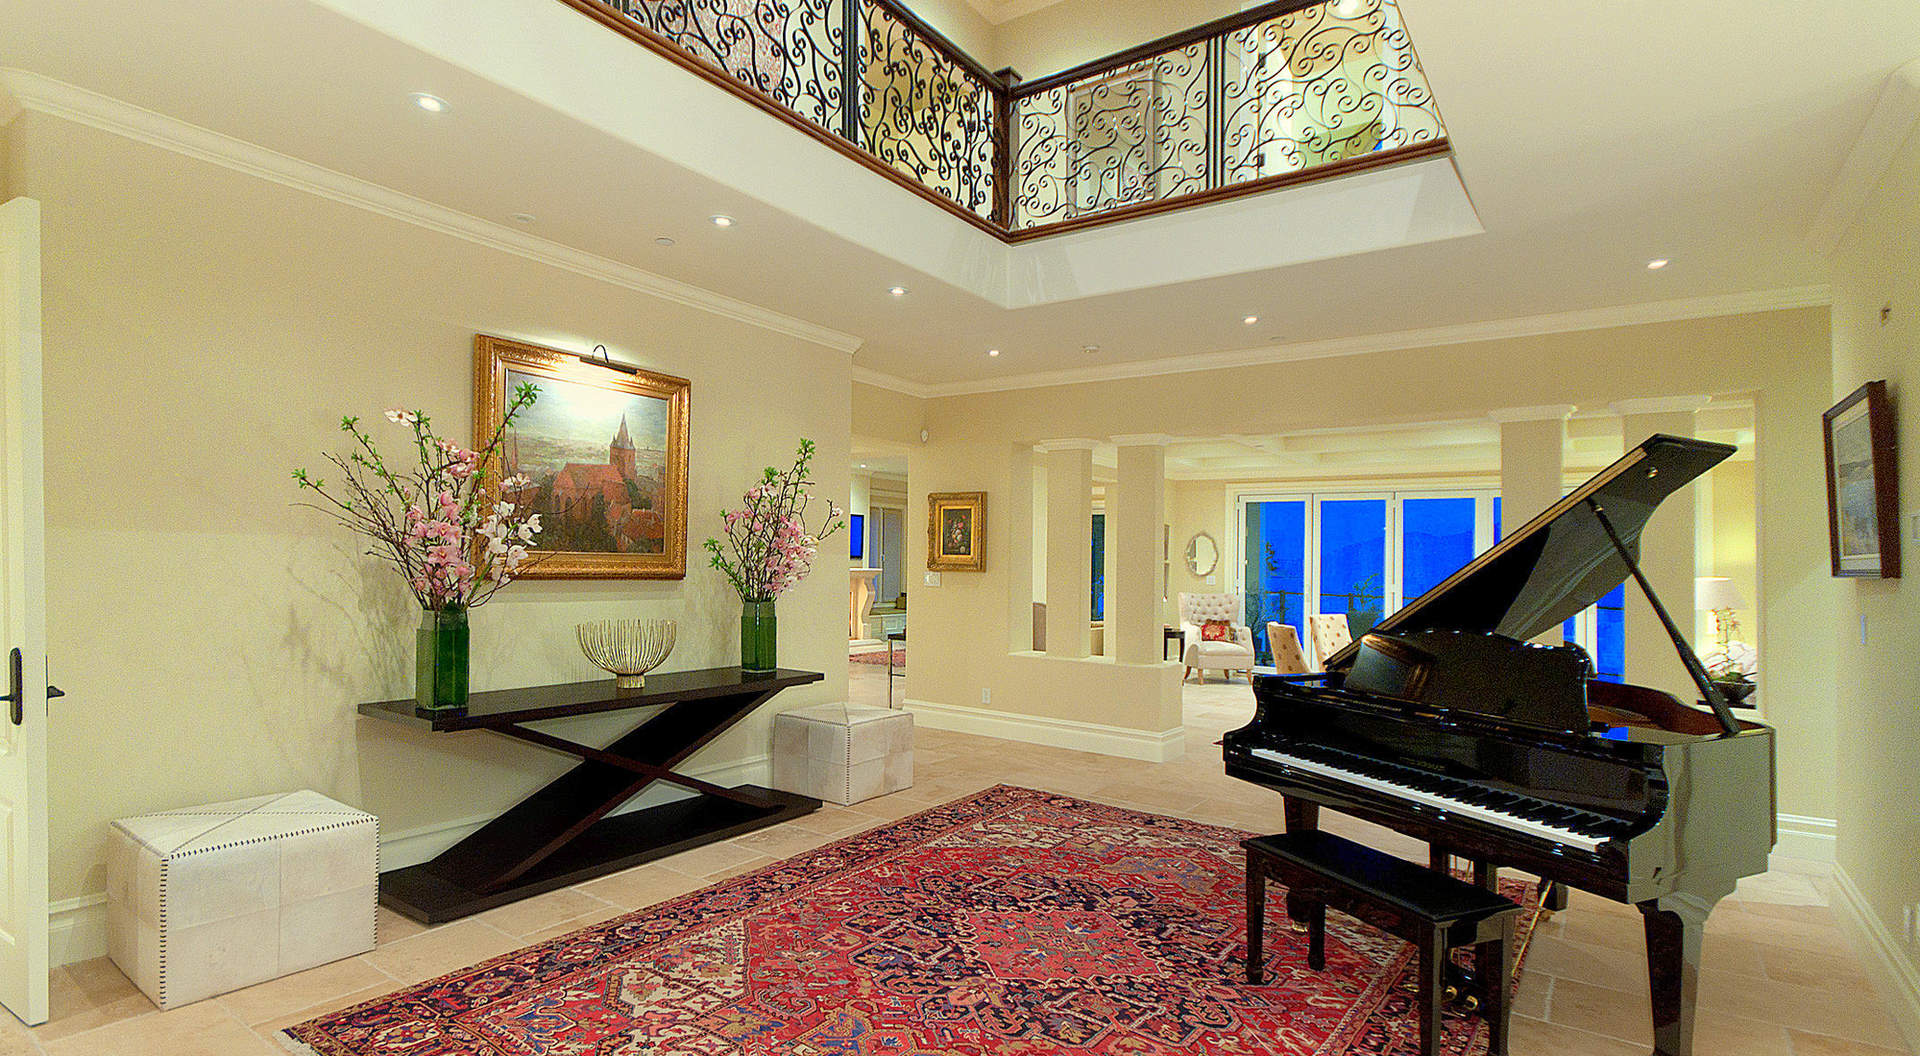 Grand Main Entry with Double Height Ceilings